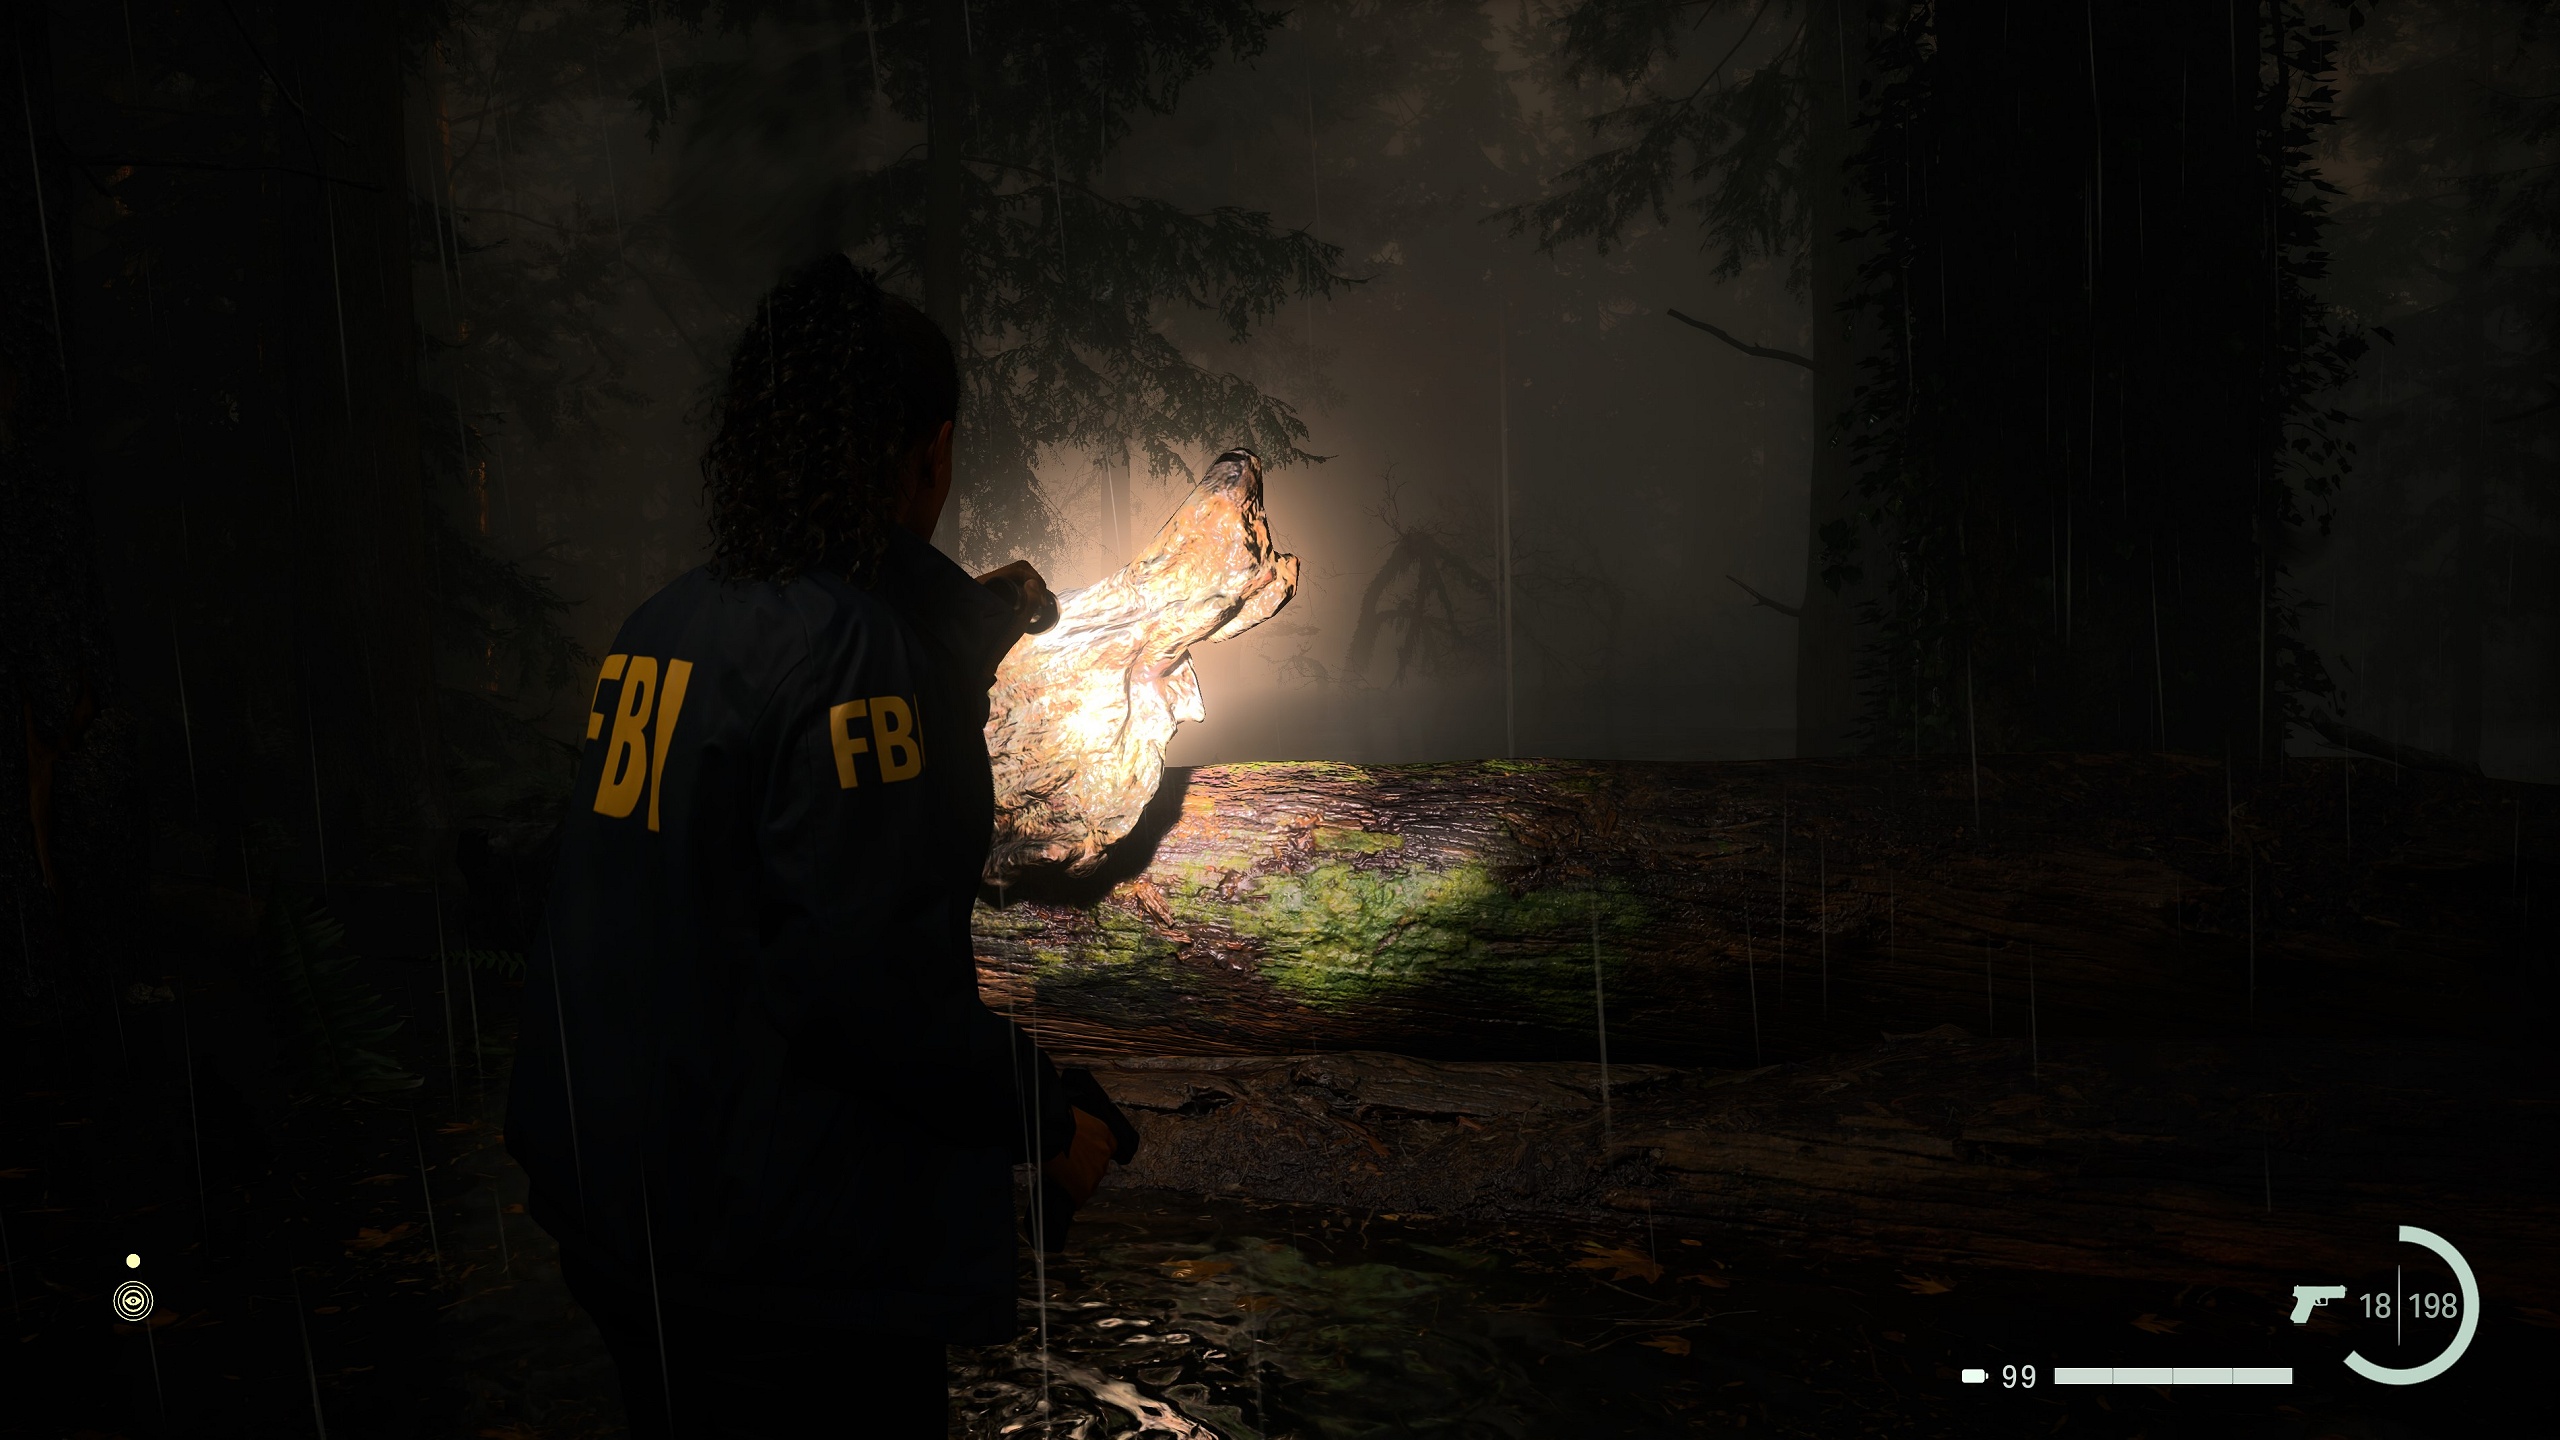 Alan Wake 2 PC System Requirements Revealed - Ray Tracing and even with  Path Tracing